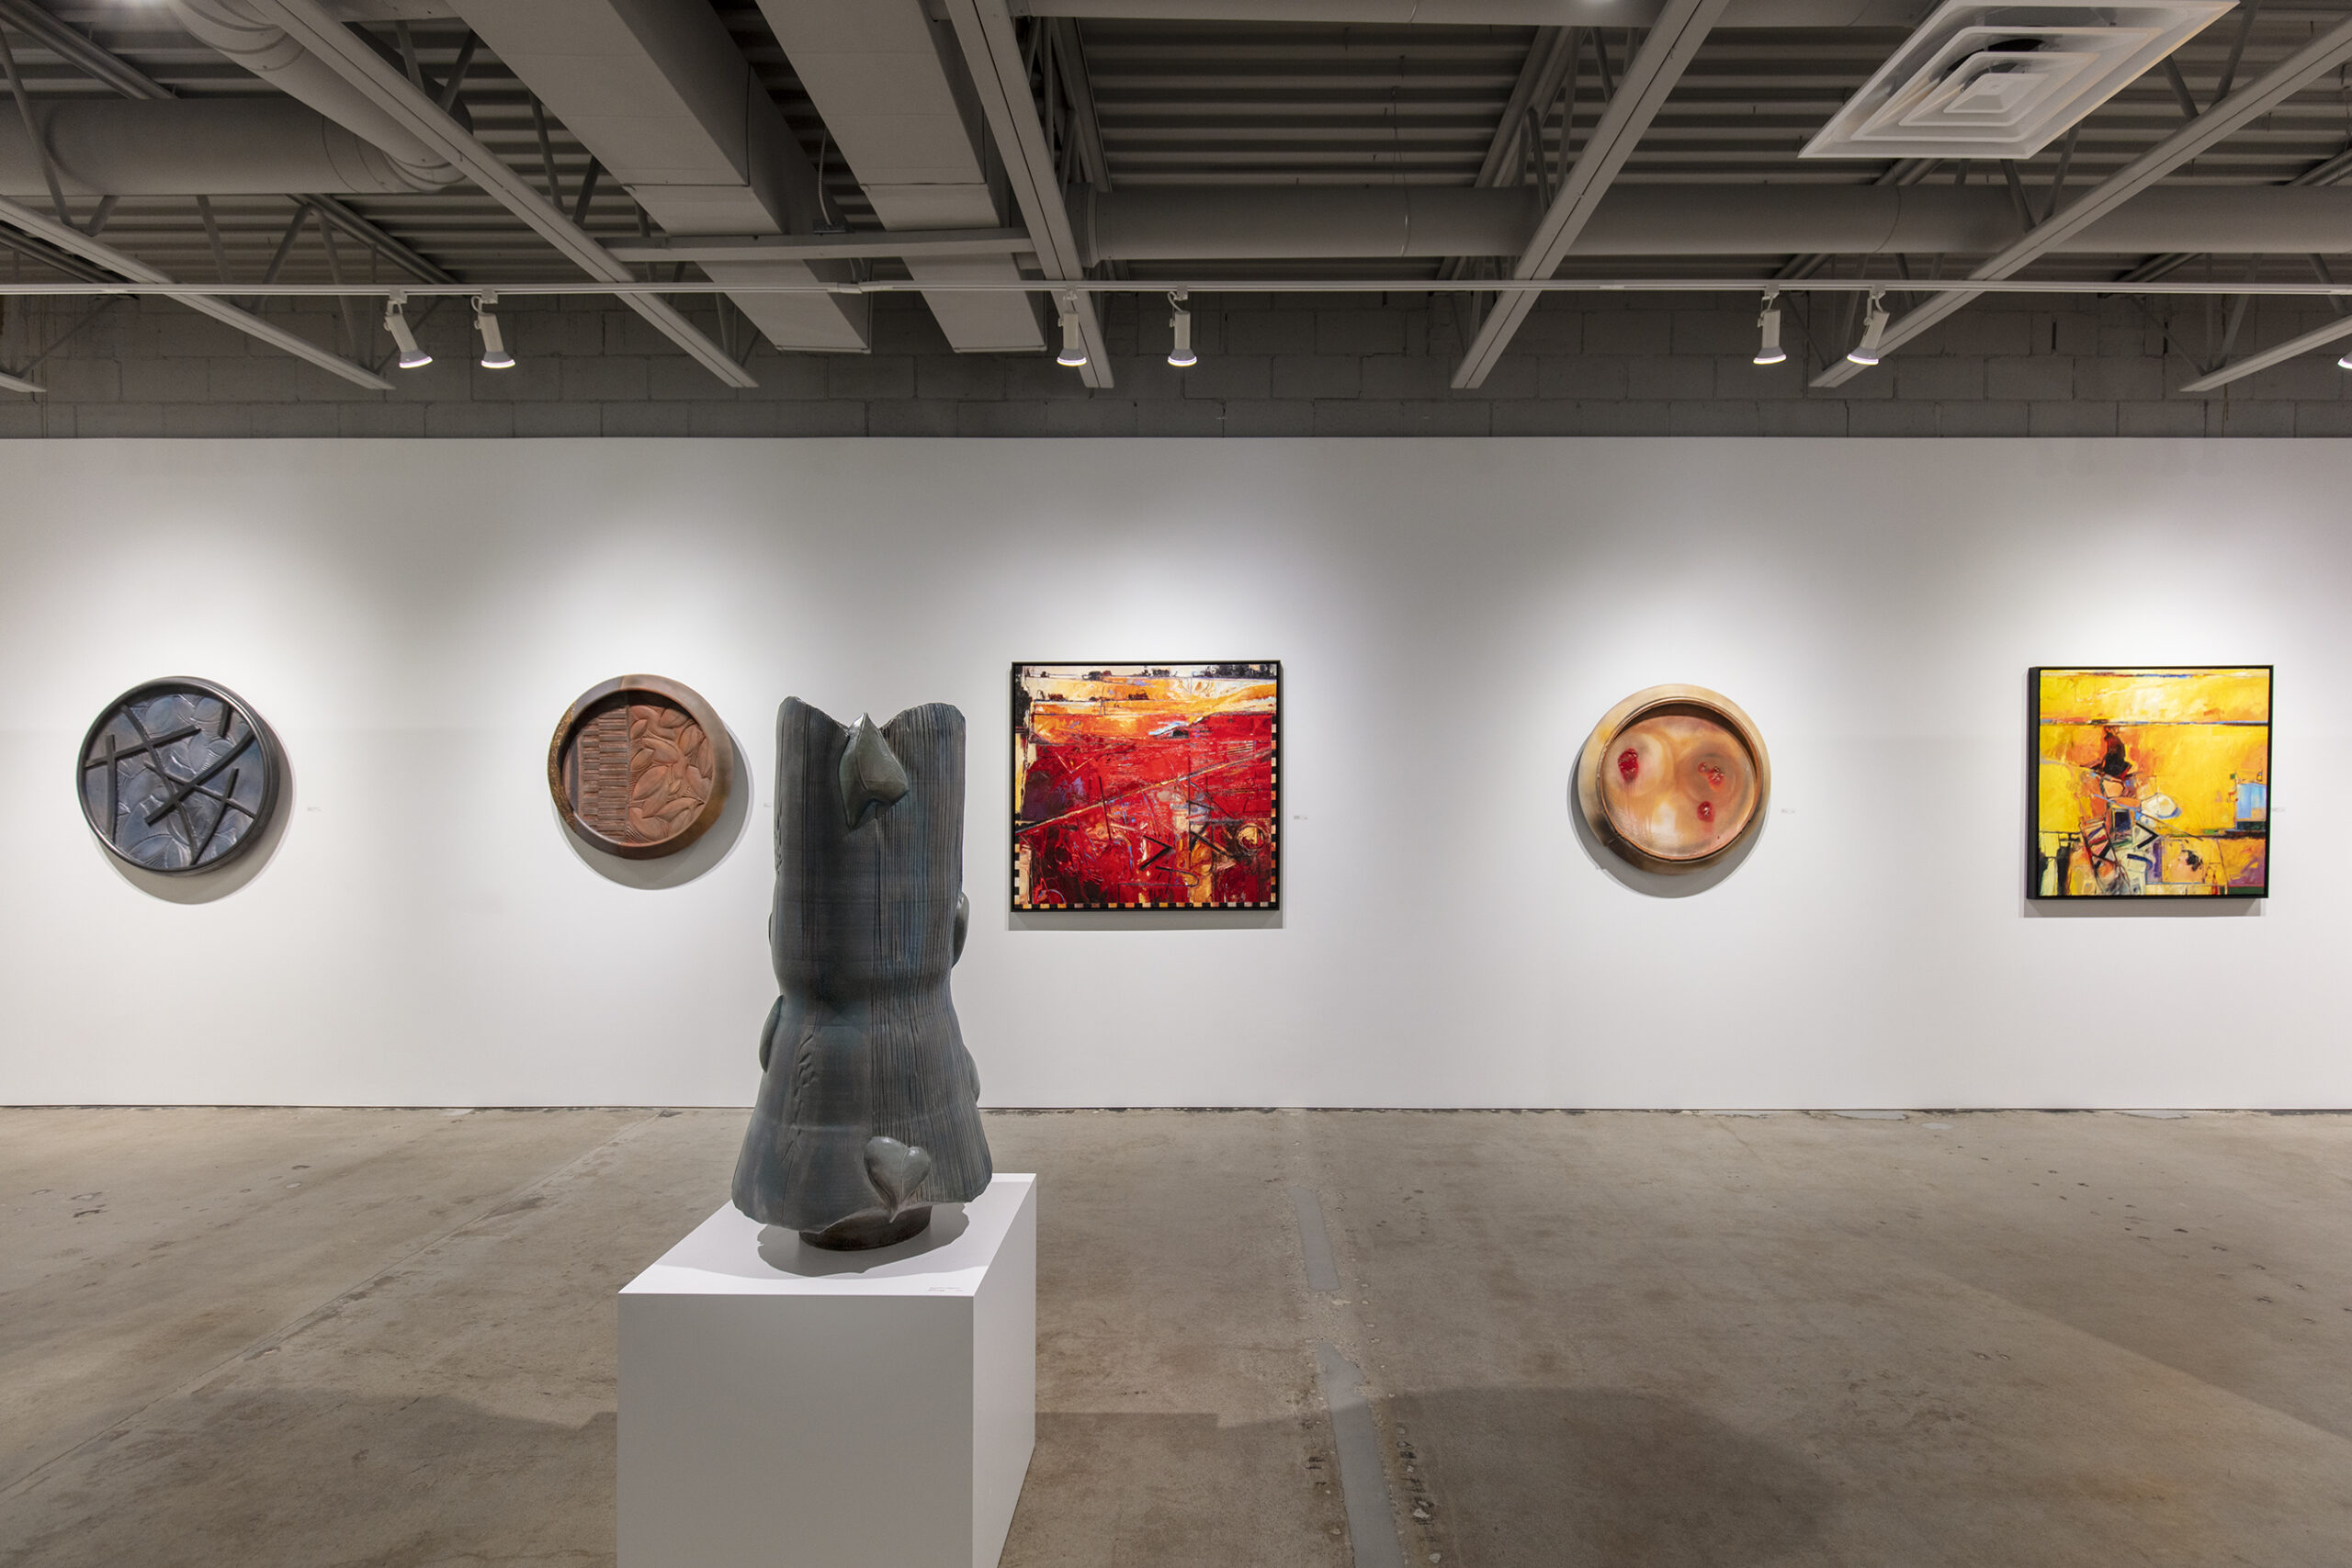 Sculpture by David Dahlquist and paintings by Wendell Arneson